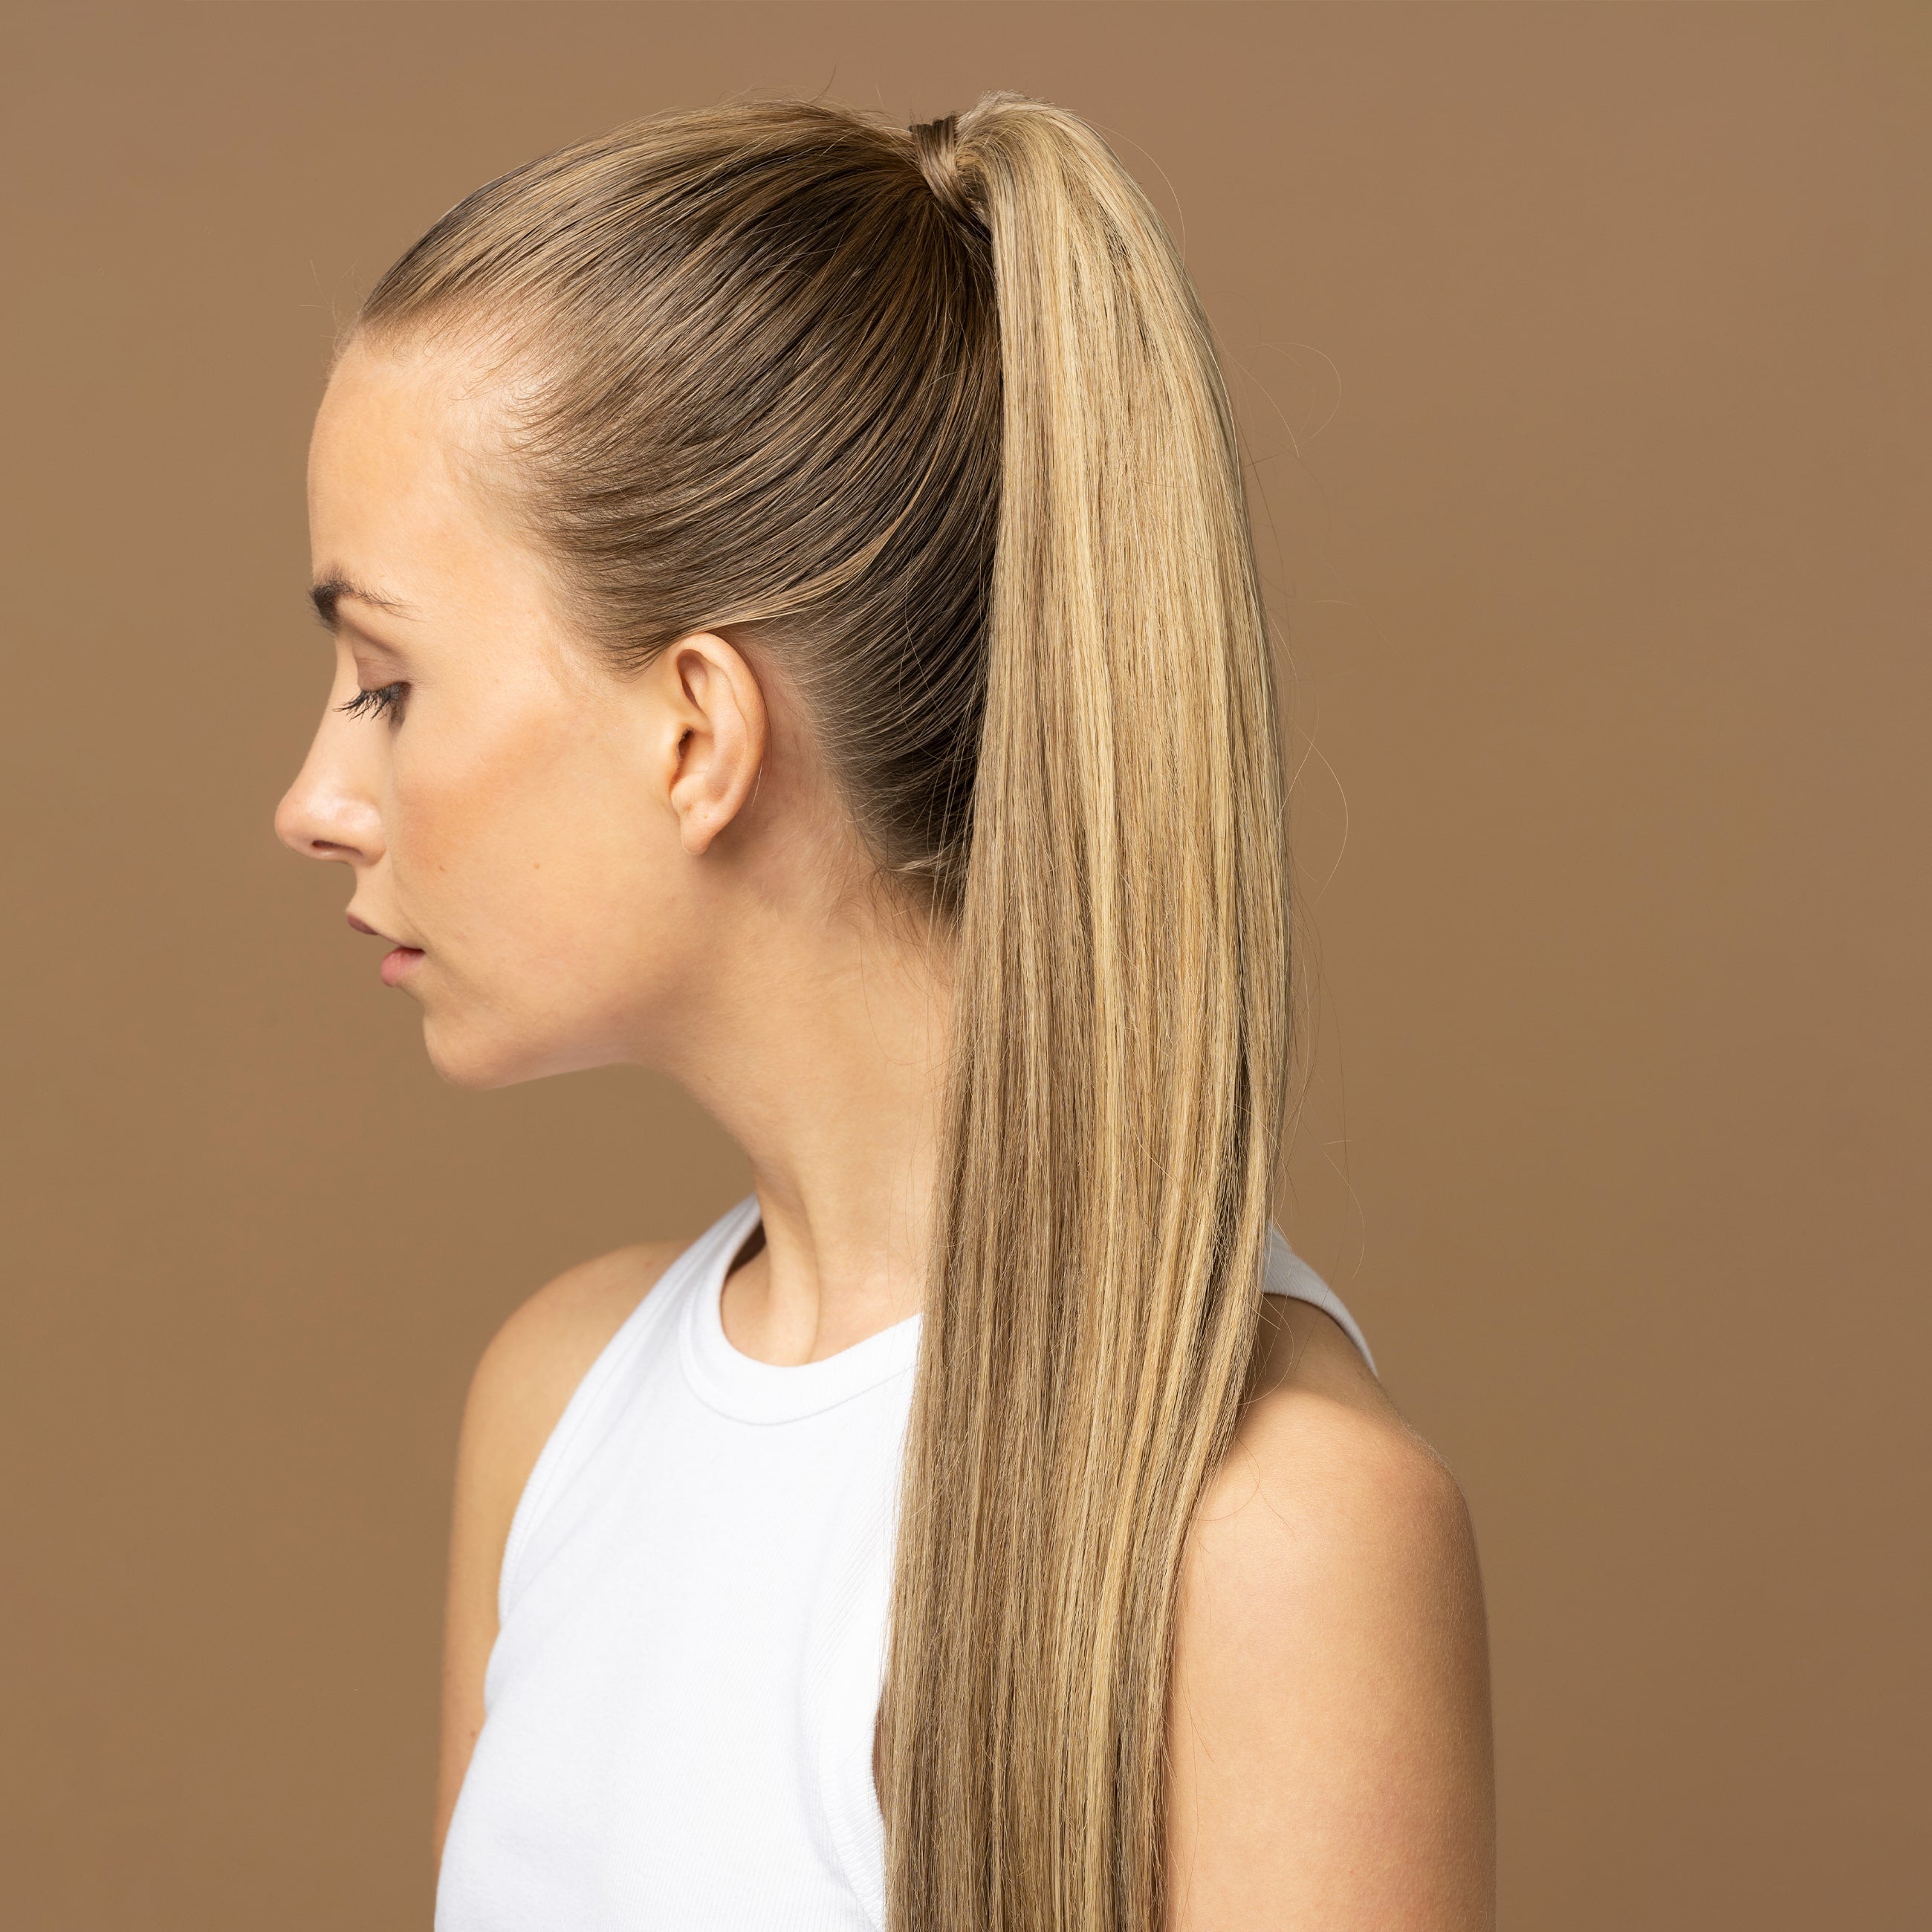 Clip in Ponytail - Natural Brown Mix 3/10